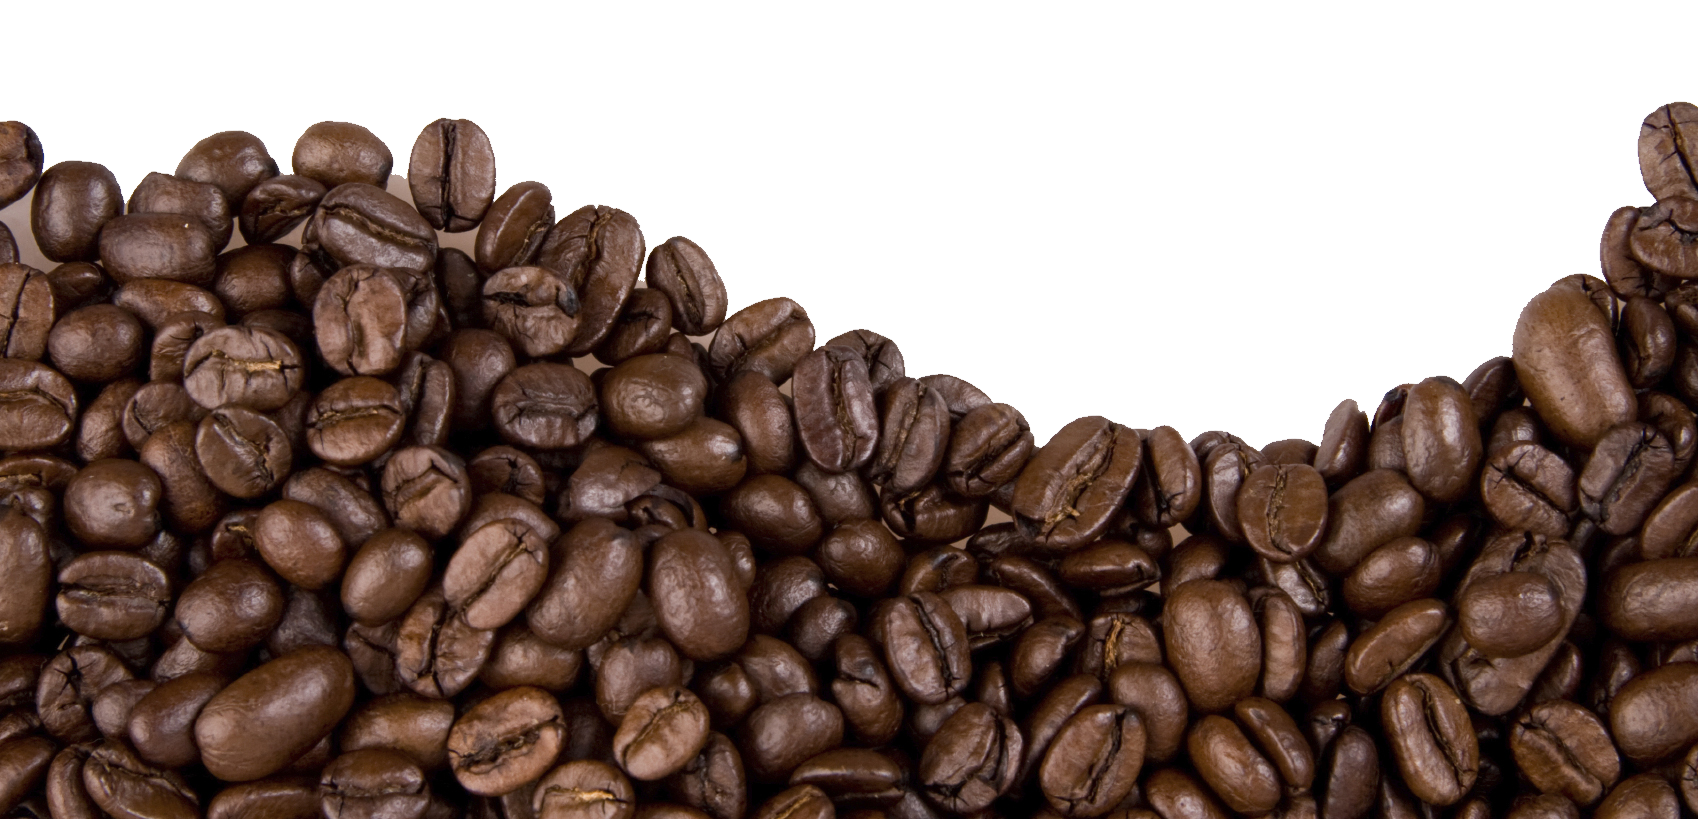 Coffee Beans Transparent Png Image   Coffeebeans Hd Png - Cafe, Transparent background PNG HD thumbnail